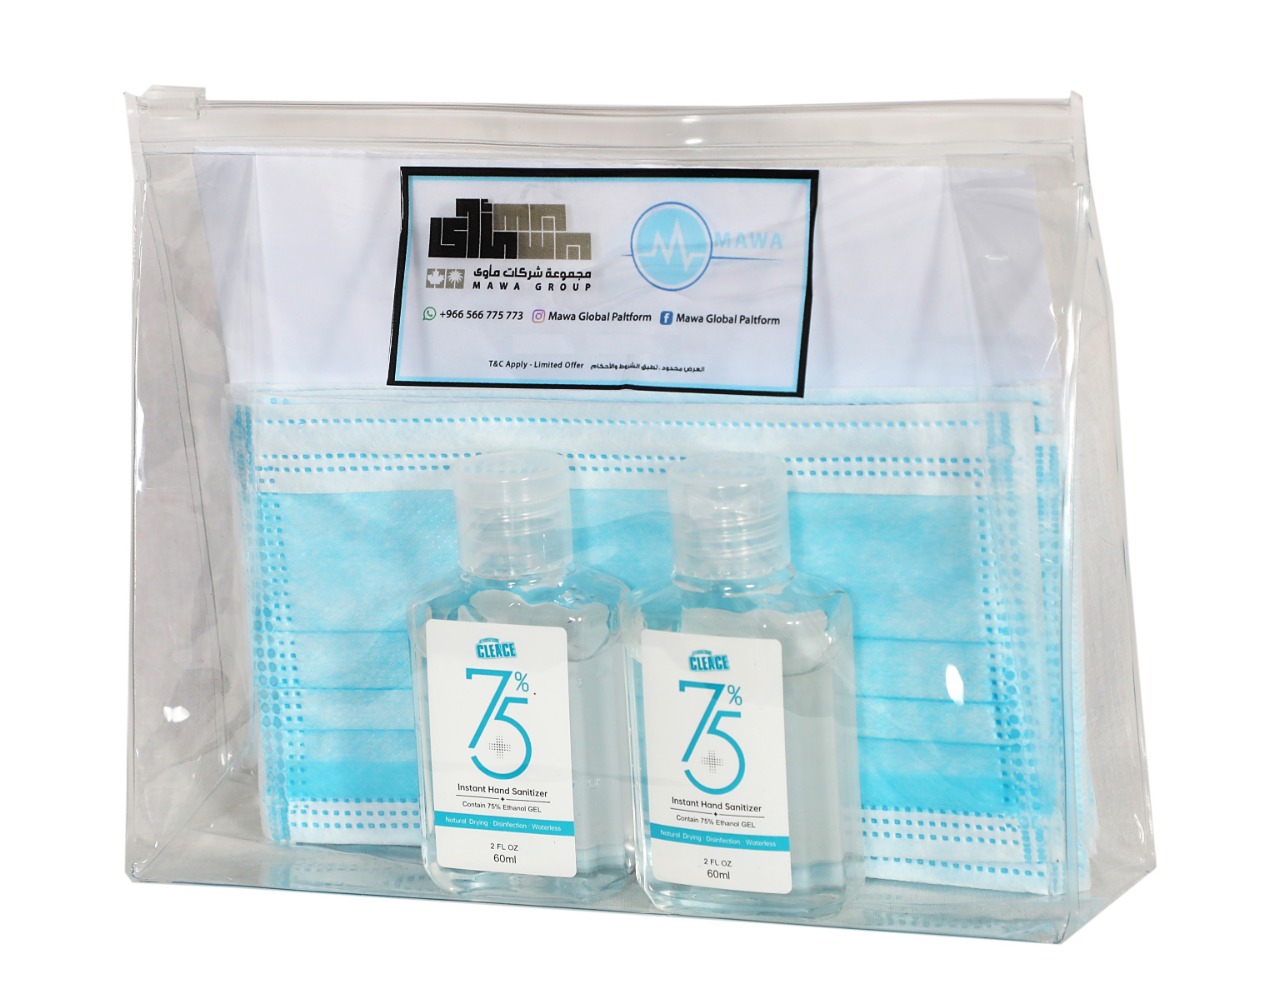 Duo pack - 2 cleace instant hand sanitizer 60ml and 6 pcs of 3 layers masks